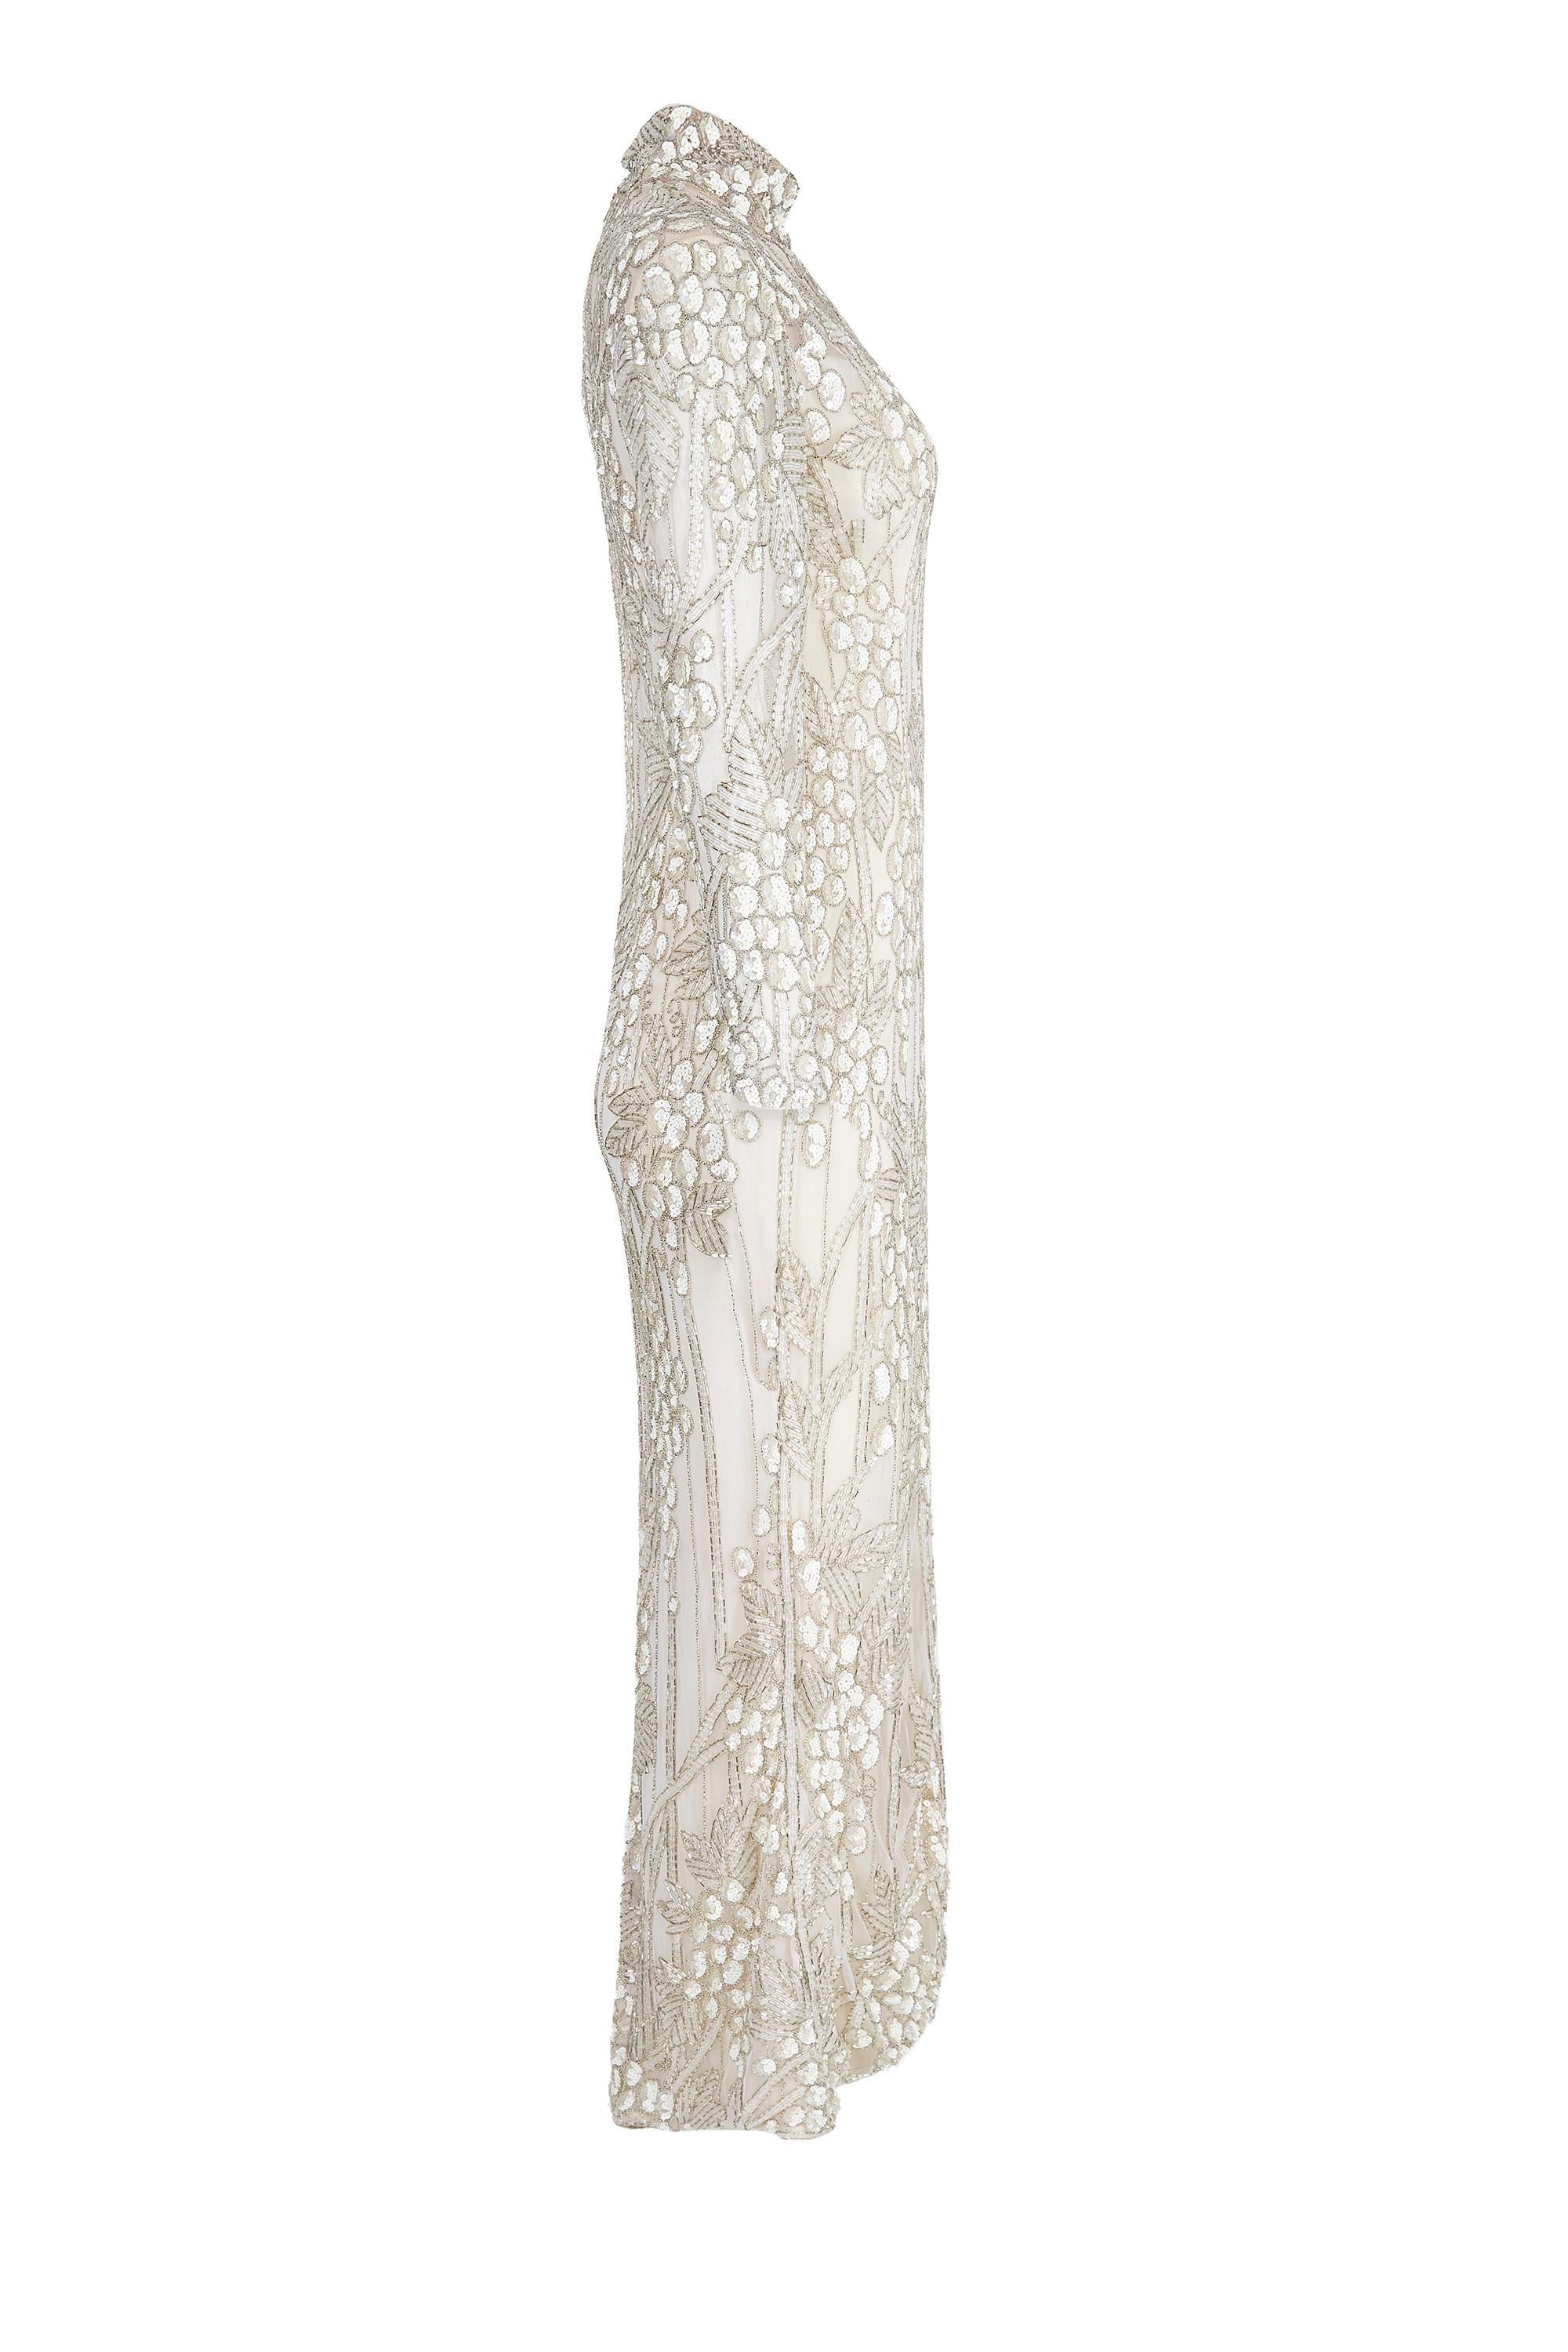 This sensational early 1990s ivory silk beaded couture bridal gown is by American designer Bill Mackie who was widely extolled for his on and off screen creations for famous divas such as Diana Ross, Cher and Carol Burnett. His look was synonymous